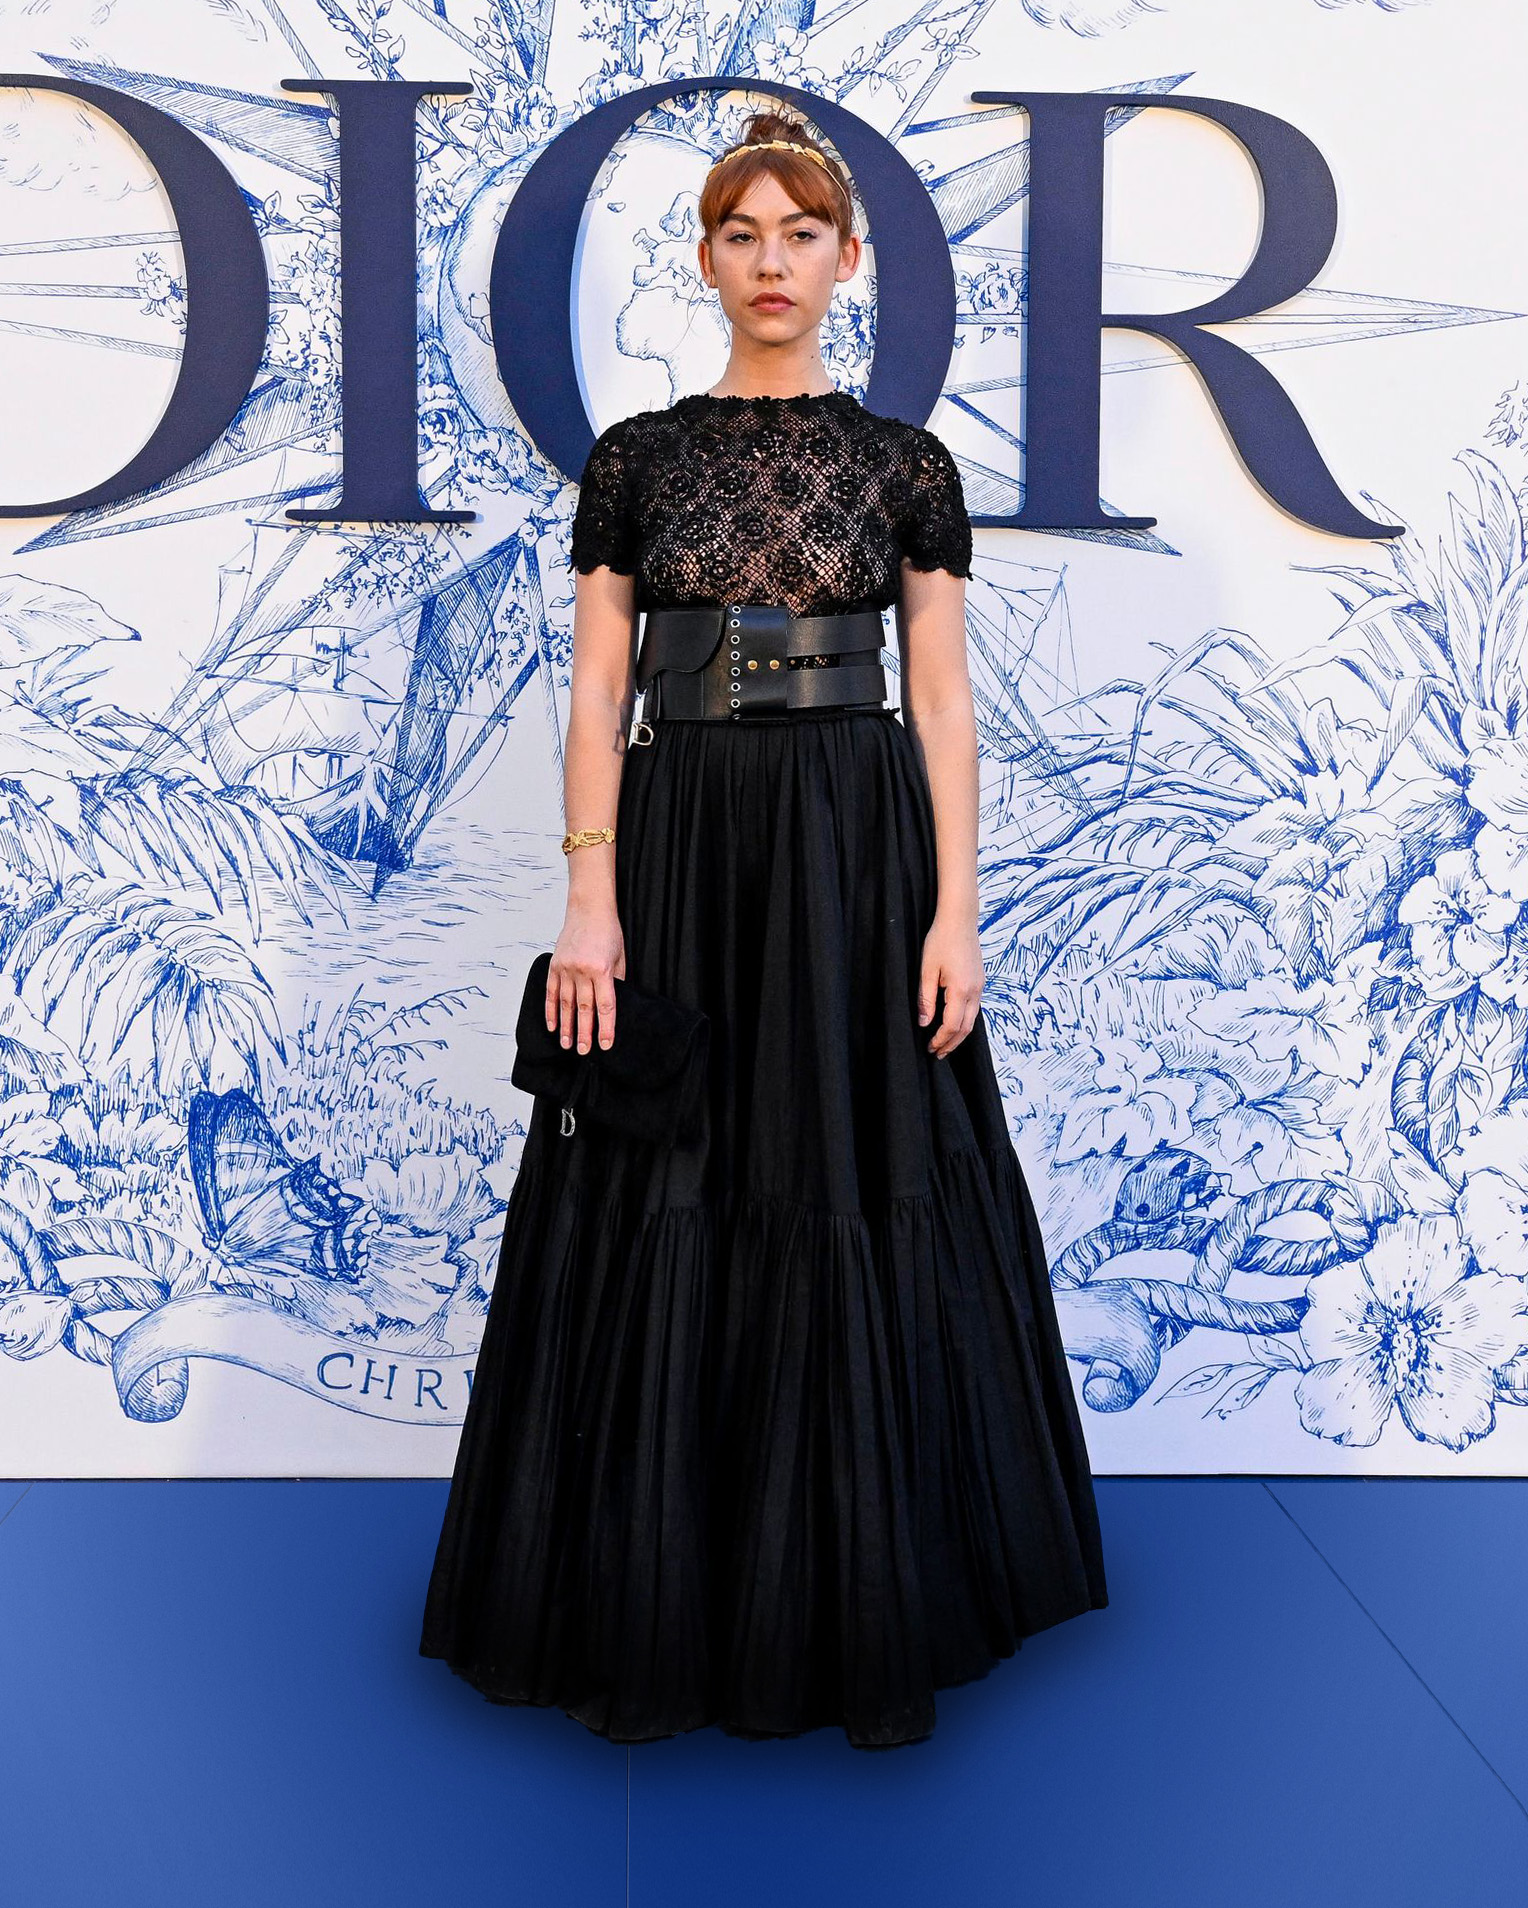 SEVILLE, SPAIN - JUNE 16: Greta Fernandez attends &quot;Crucero Collection&quot; fashion show presentation by Dior at Plaza de España on June 16, 2022 in Seville, Spain. (Photo by Carlos Alvarez/Getty Images for Dior)